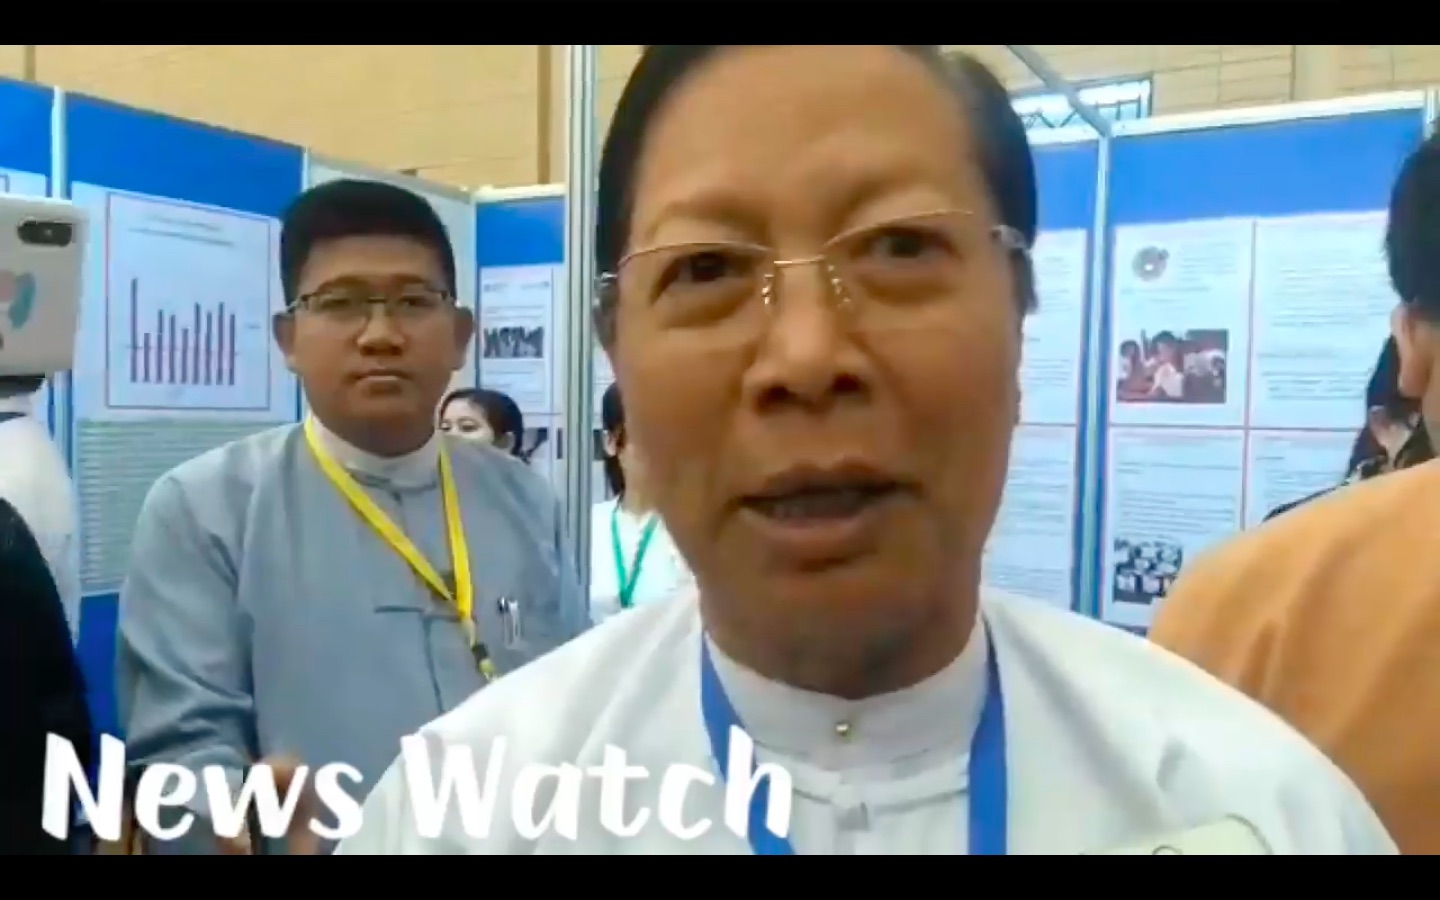 Religion Minister speaks to reporters in NewsWatch video – screenshot via Facebook video